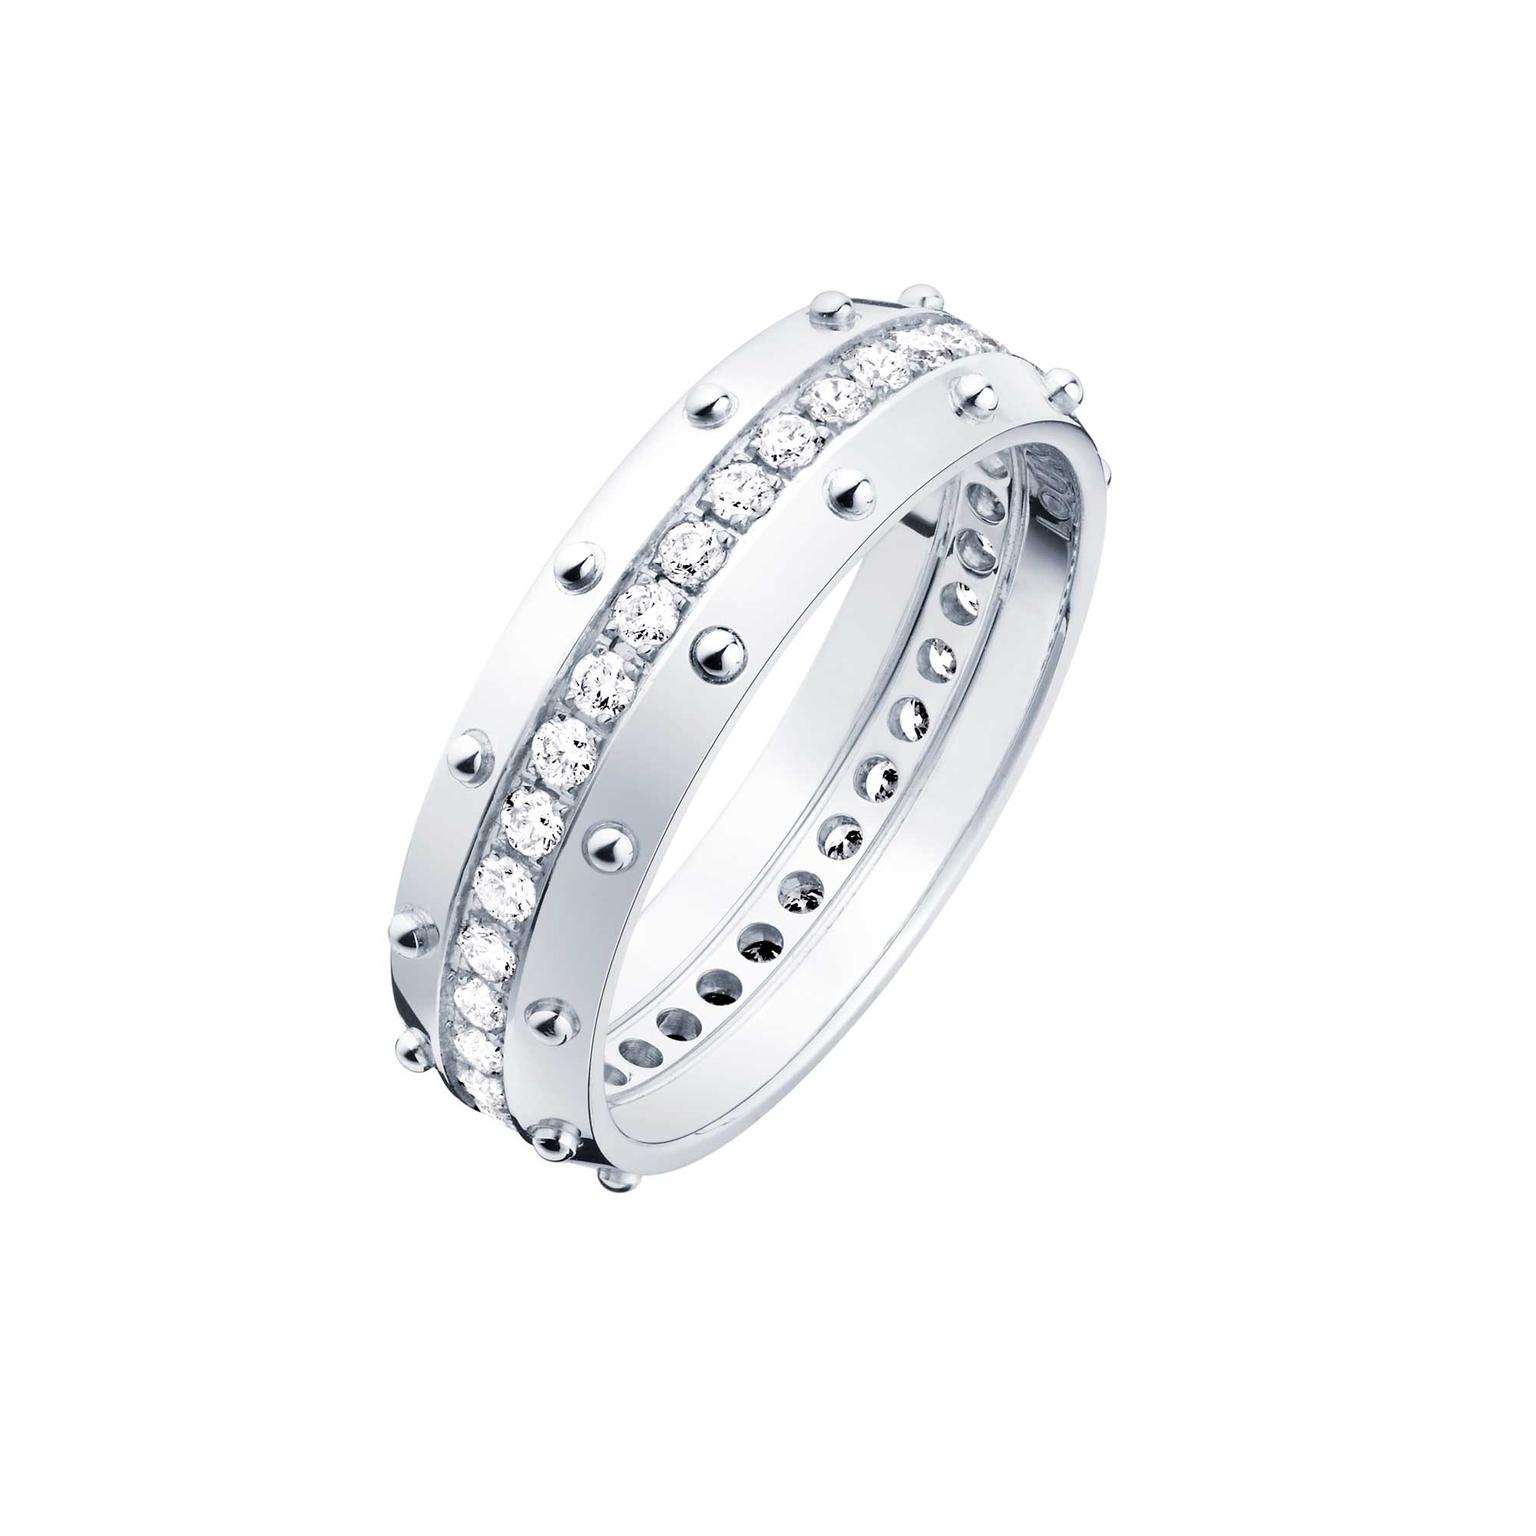 Louis Vuitton Emprise ring in white gold with diamonds